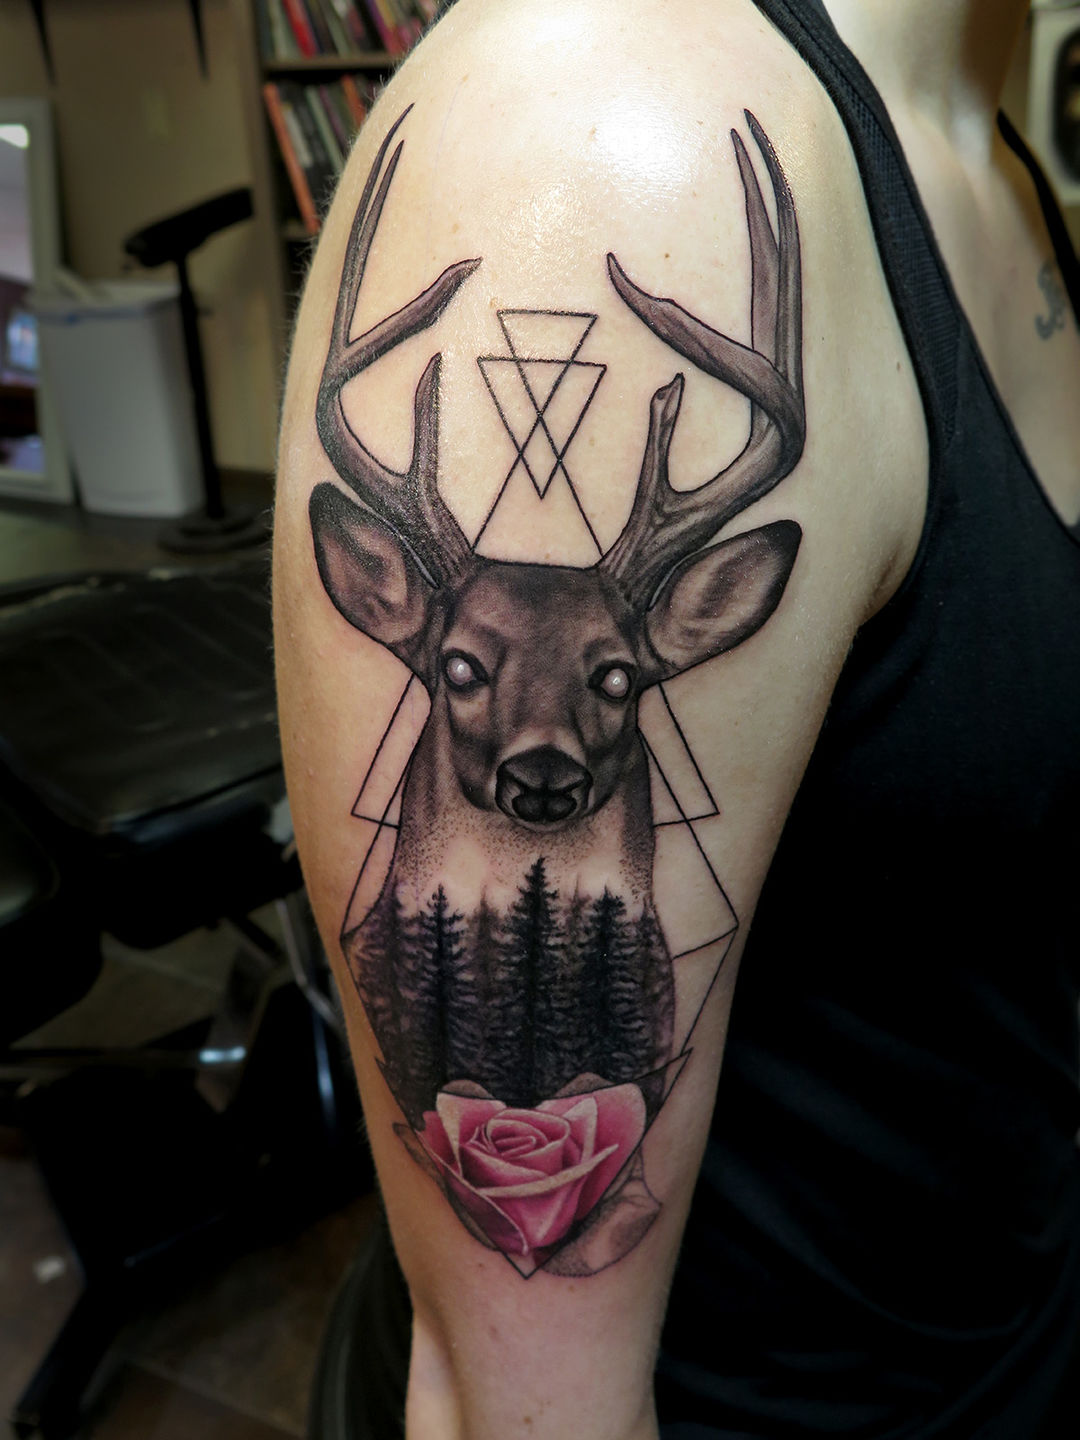 WANTED DEER HUNTERS for Limited Edition TATTOO  HuntingNetcom  Forums  Deer tattoo Hunting tattoos Deer tattoo designs